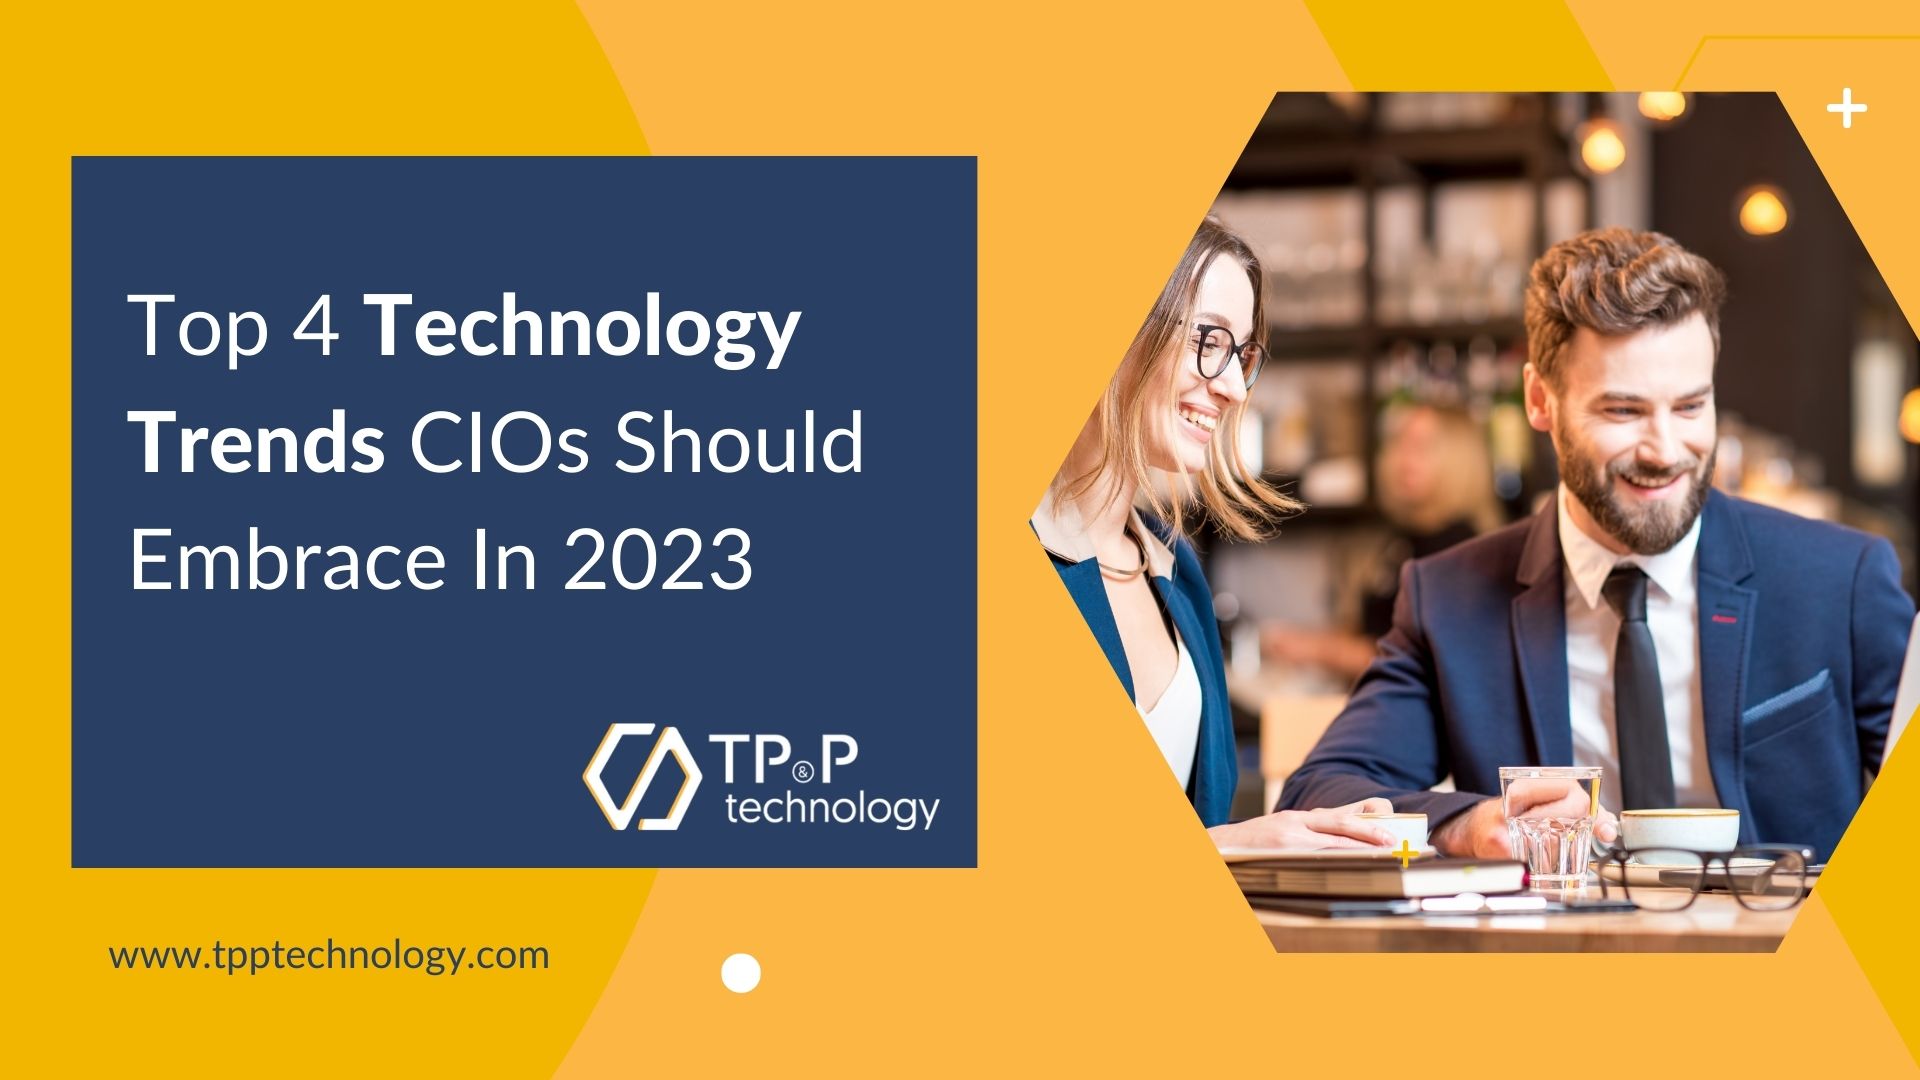 Top 4 Technology Trends CIOs Should Embrace In 2023